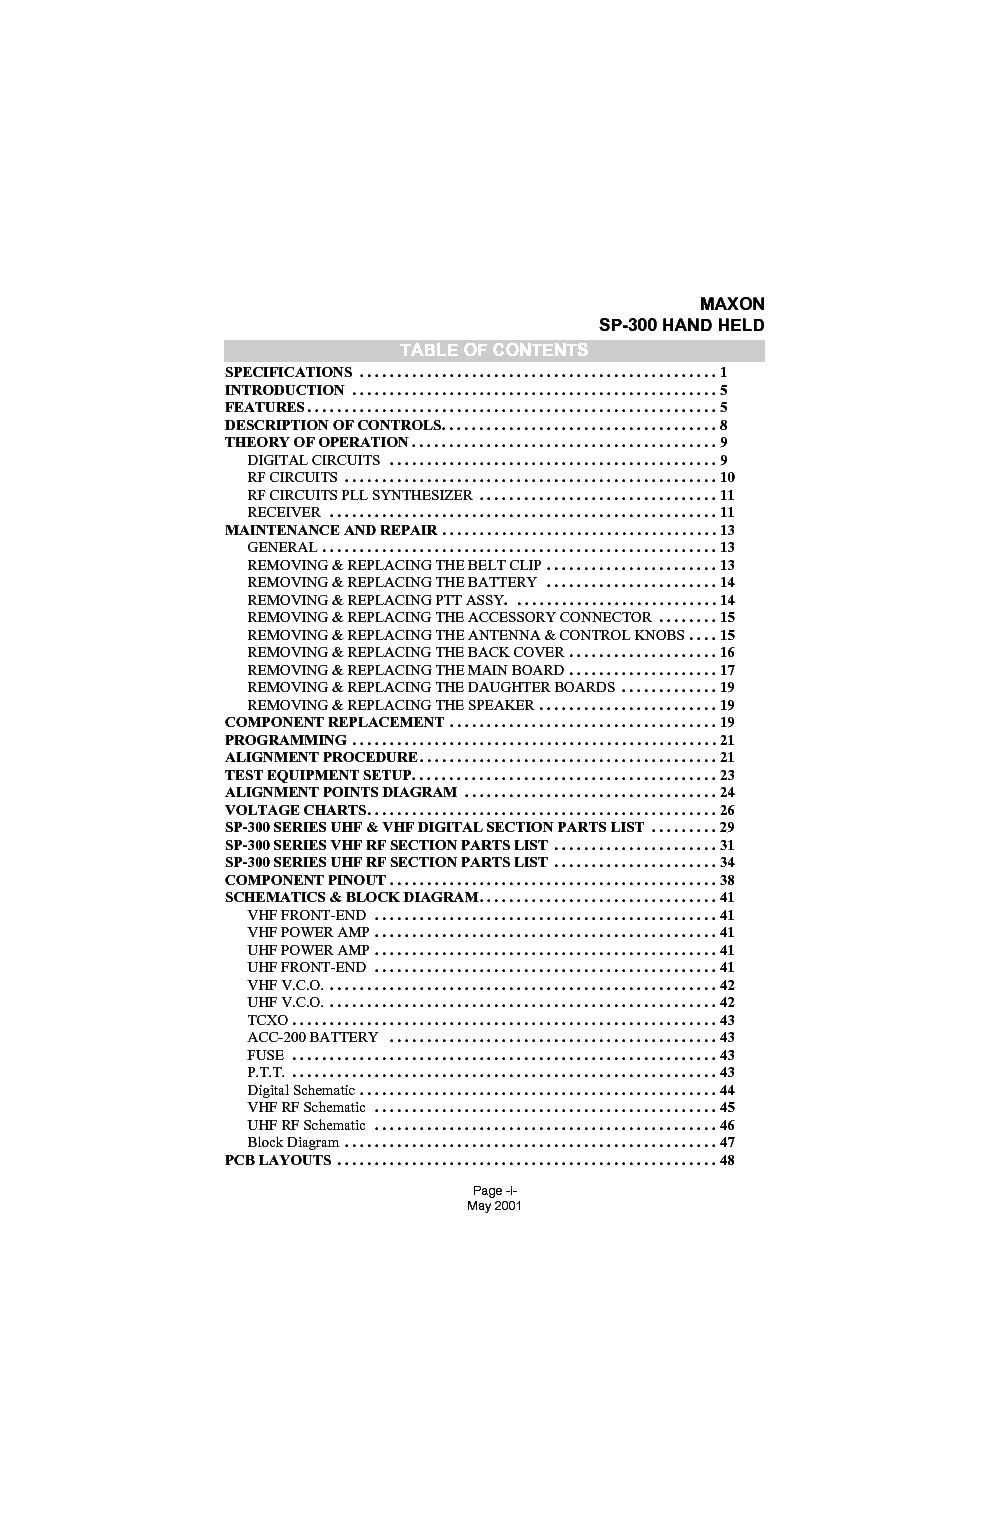 MAXON SP-300-SERIES SM service manual (2nd page)